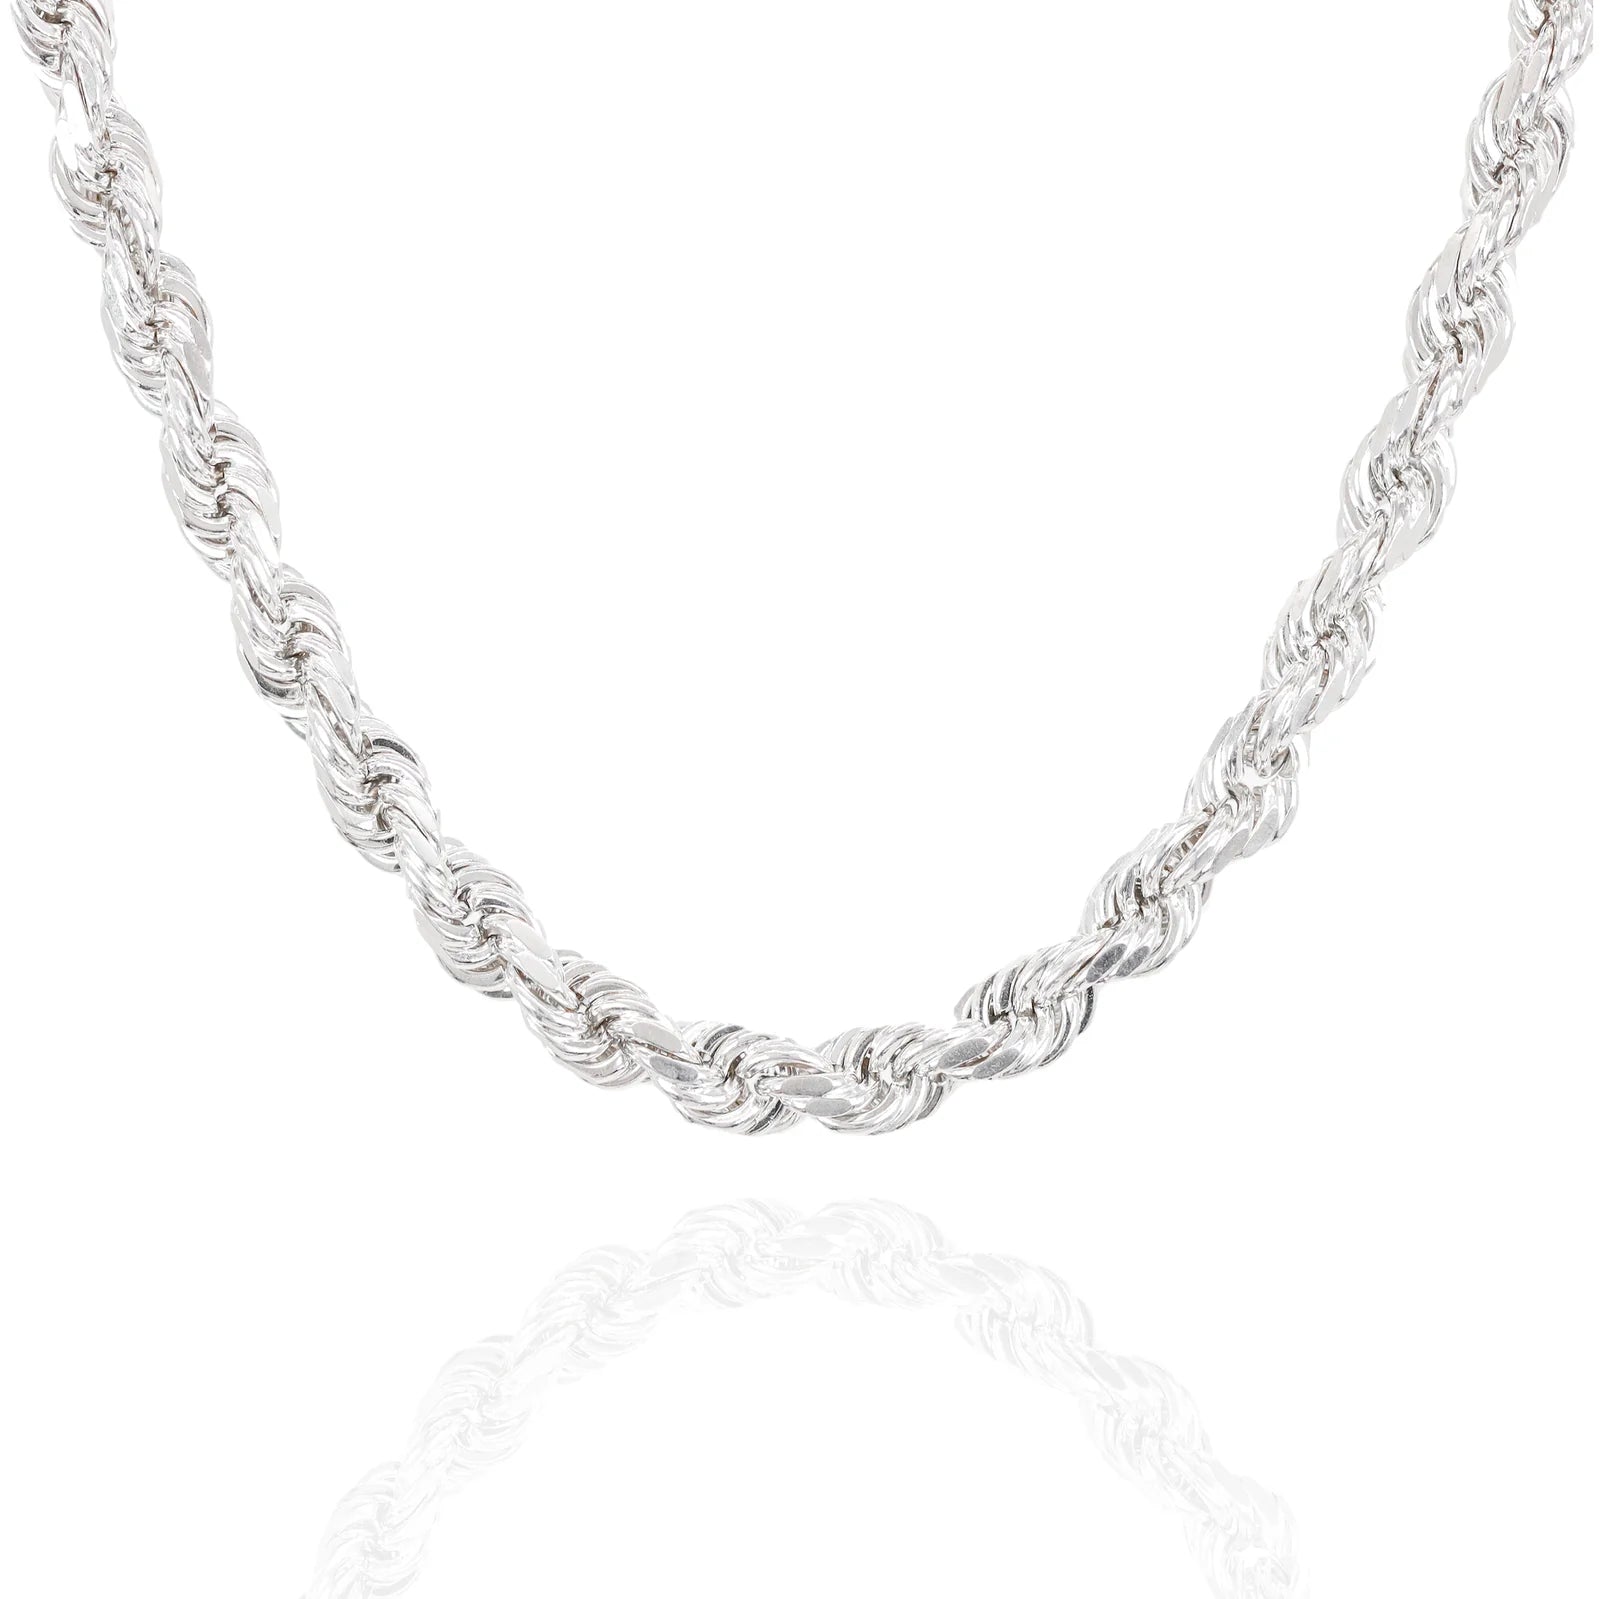 10k White Gold Hollow Rope Chain 2.5 mm - 7 mm